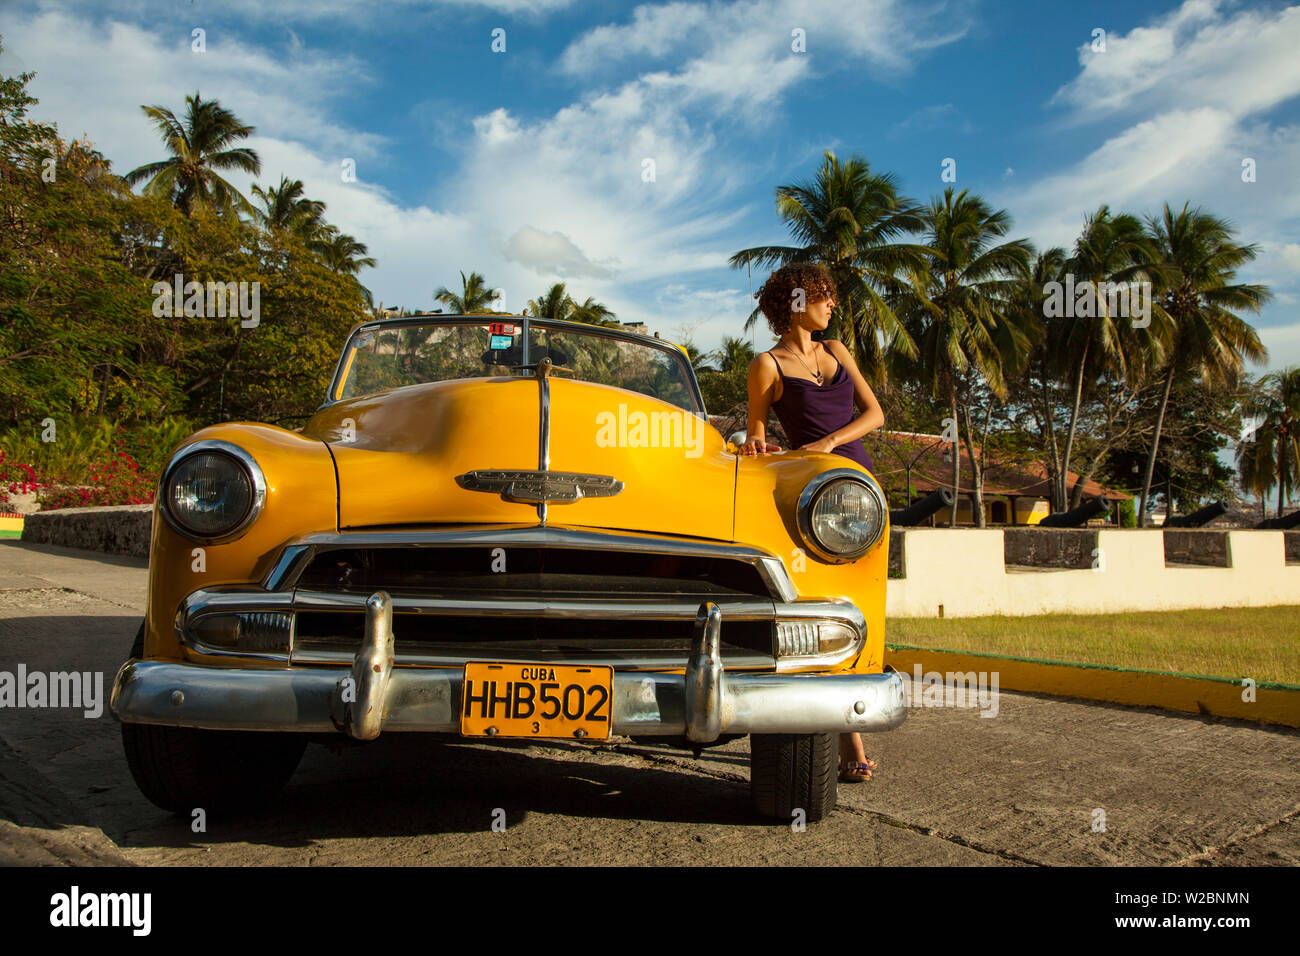 Young woman posing with a Classic 50's Chevrolet, Havana, Cuba (MR) Stock Photo